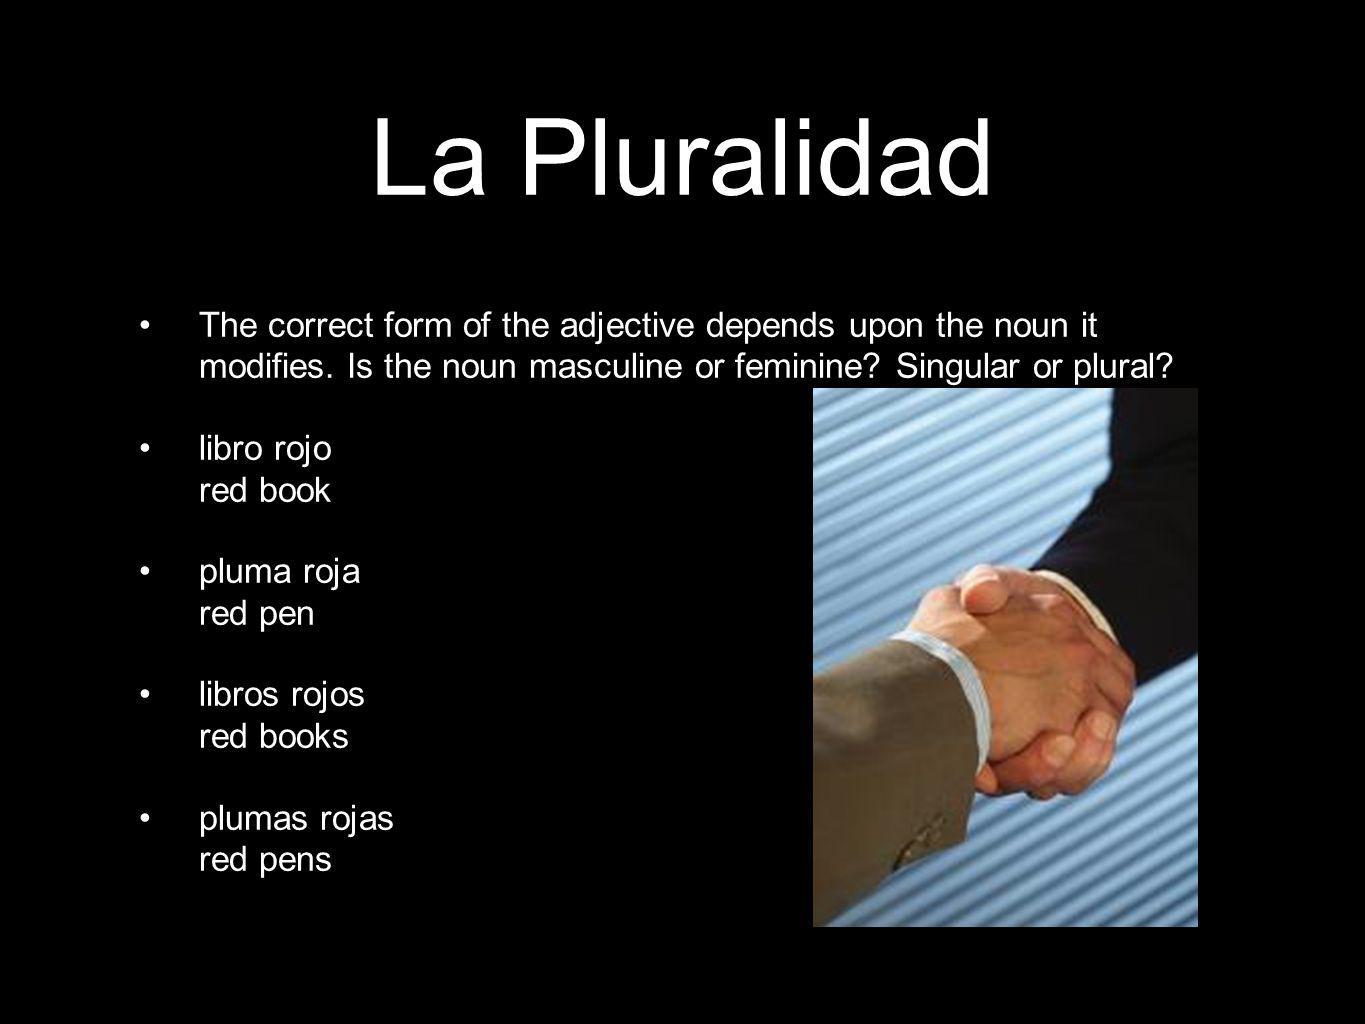 La Pluralidad The correct form of the adjective depends upon the noun it modifies.